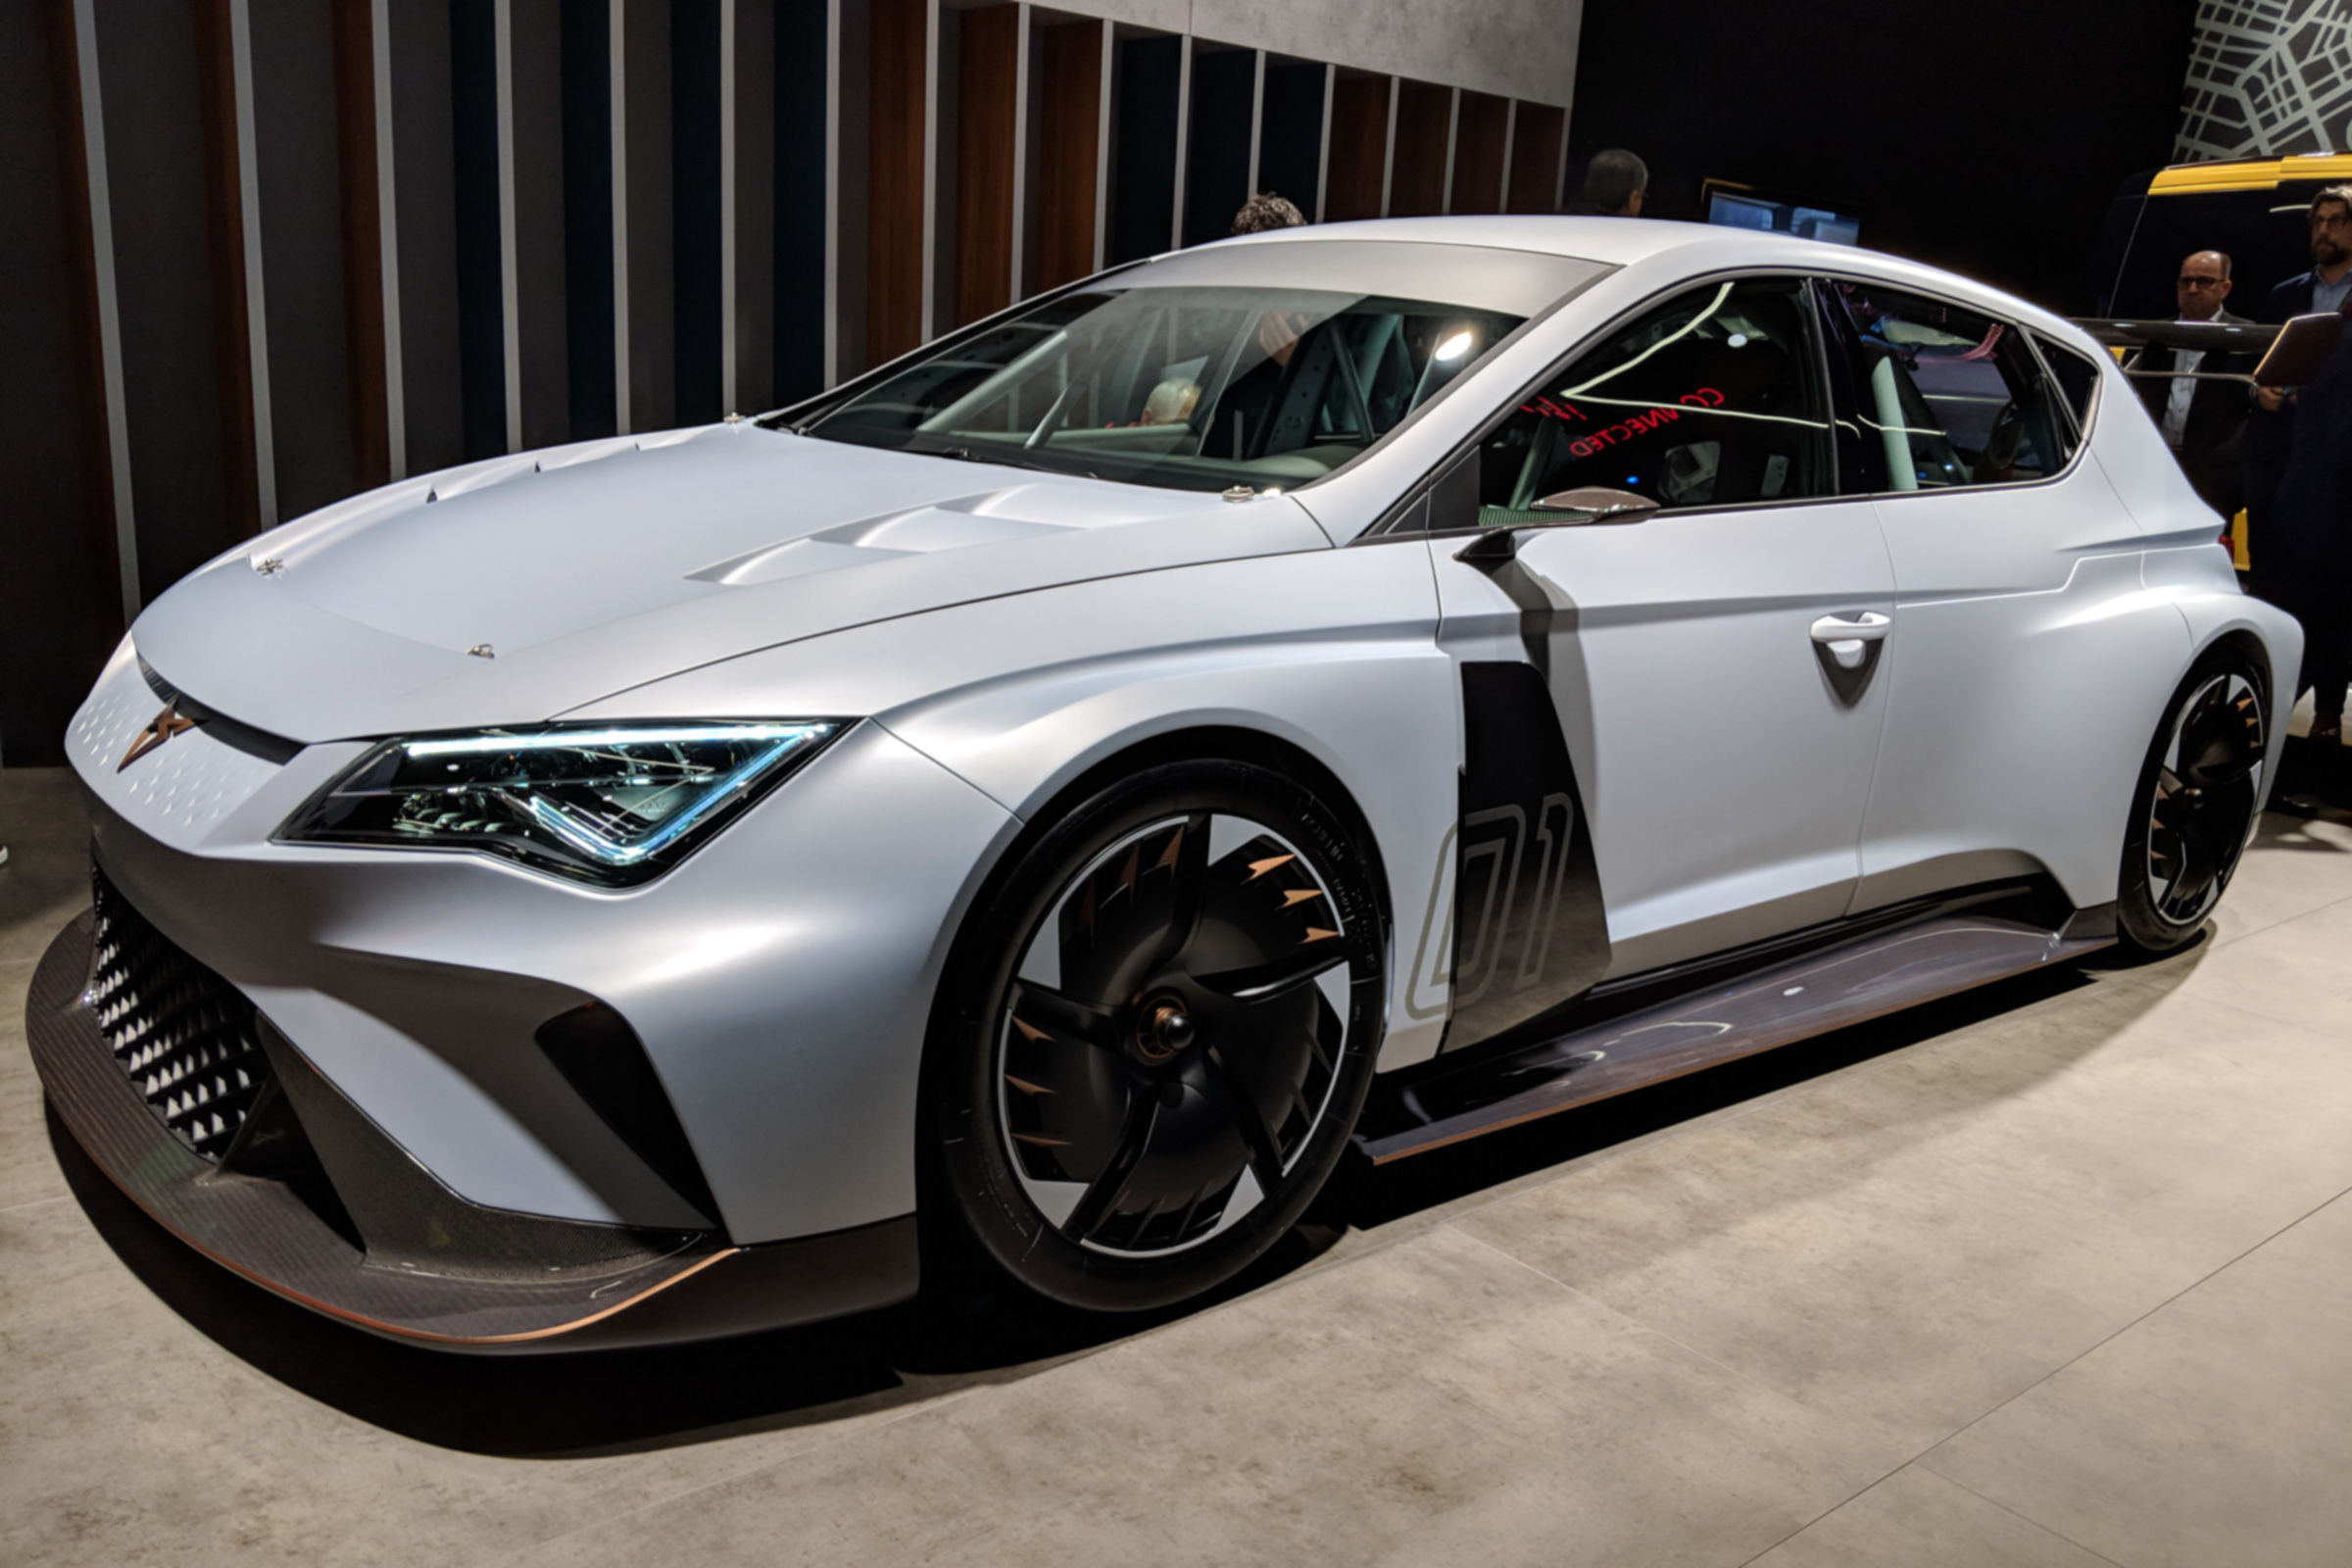 Cupra eRacer concept new electric touring car from SEAT’s performance